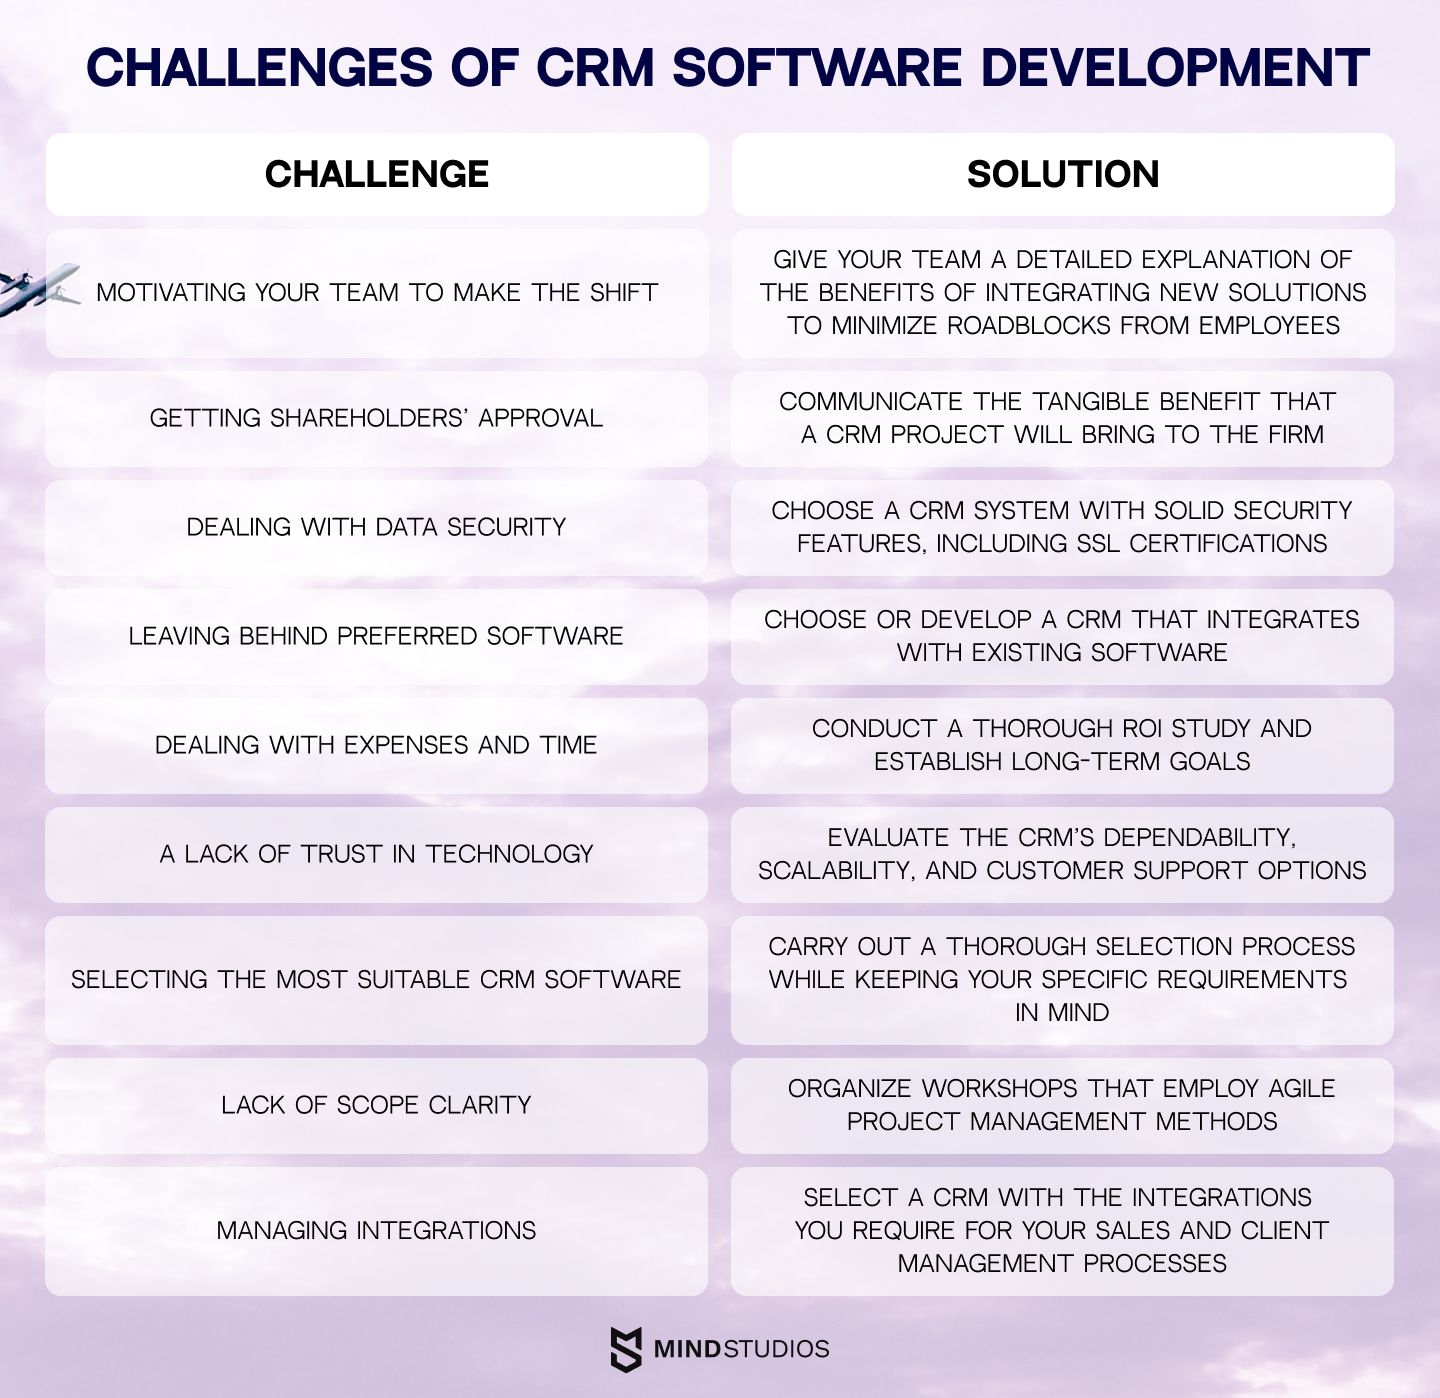 Challenges of CRM software development